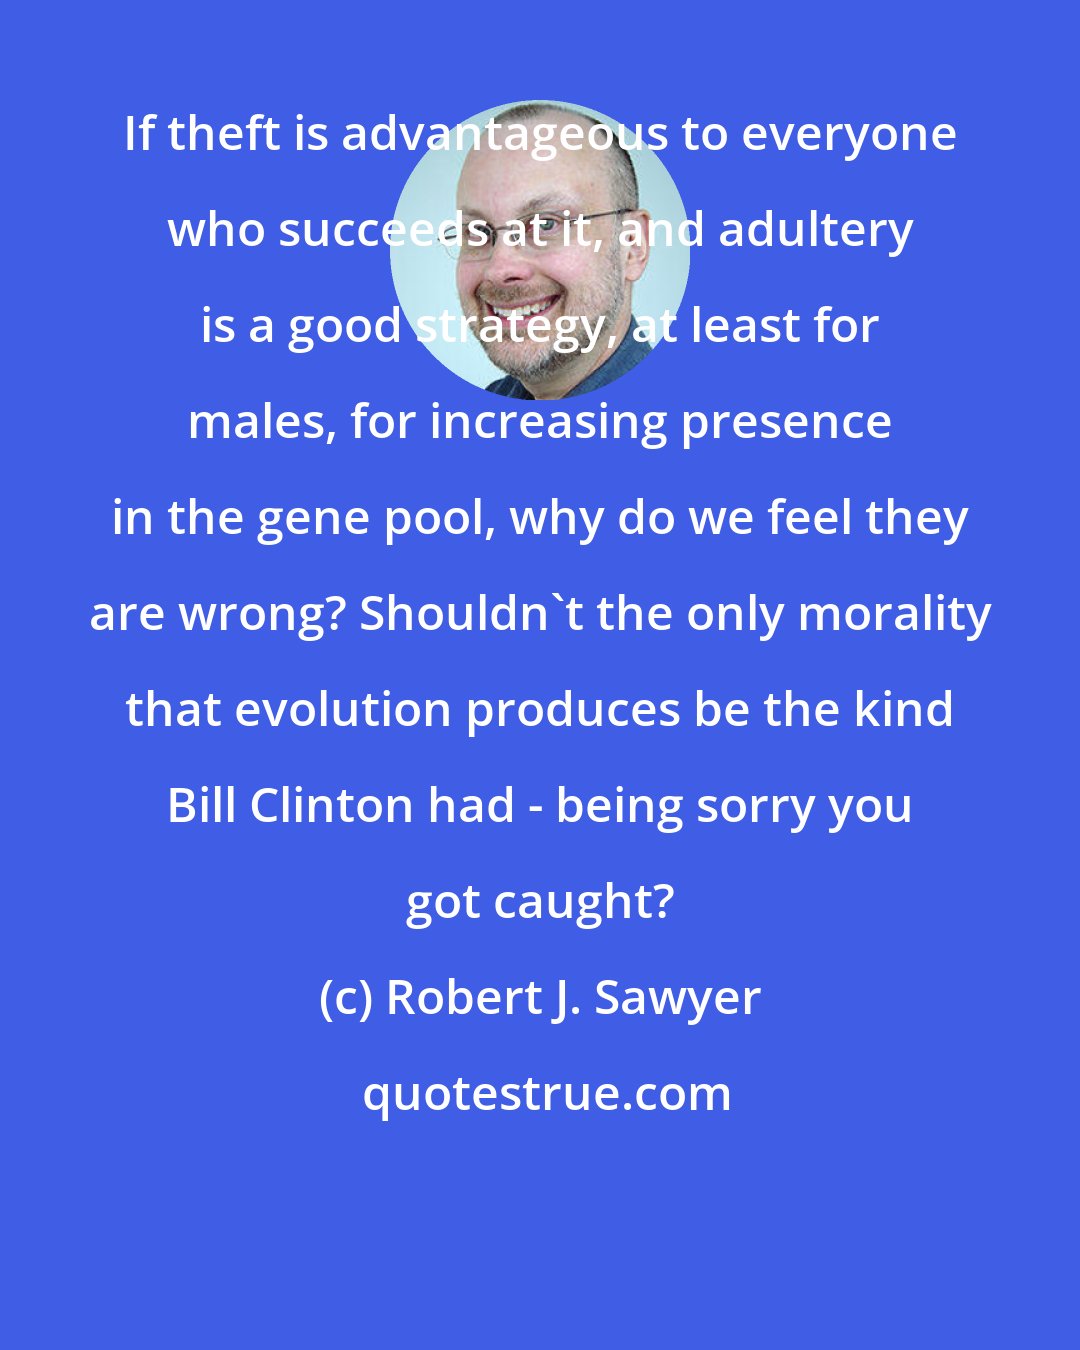 Robert J. Sawyer: If theft is advantageous to everyone who succeeds at it, and adultery is a good strategy, at least for males, for increasing presence in the gene pool, why do we feel they are wrong? Shouldn't the only morality that evolution produces be the kind Bill Clinton had - being sorry you got caught?